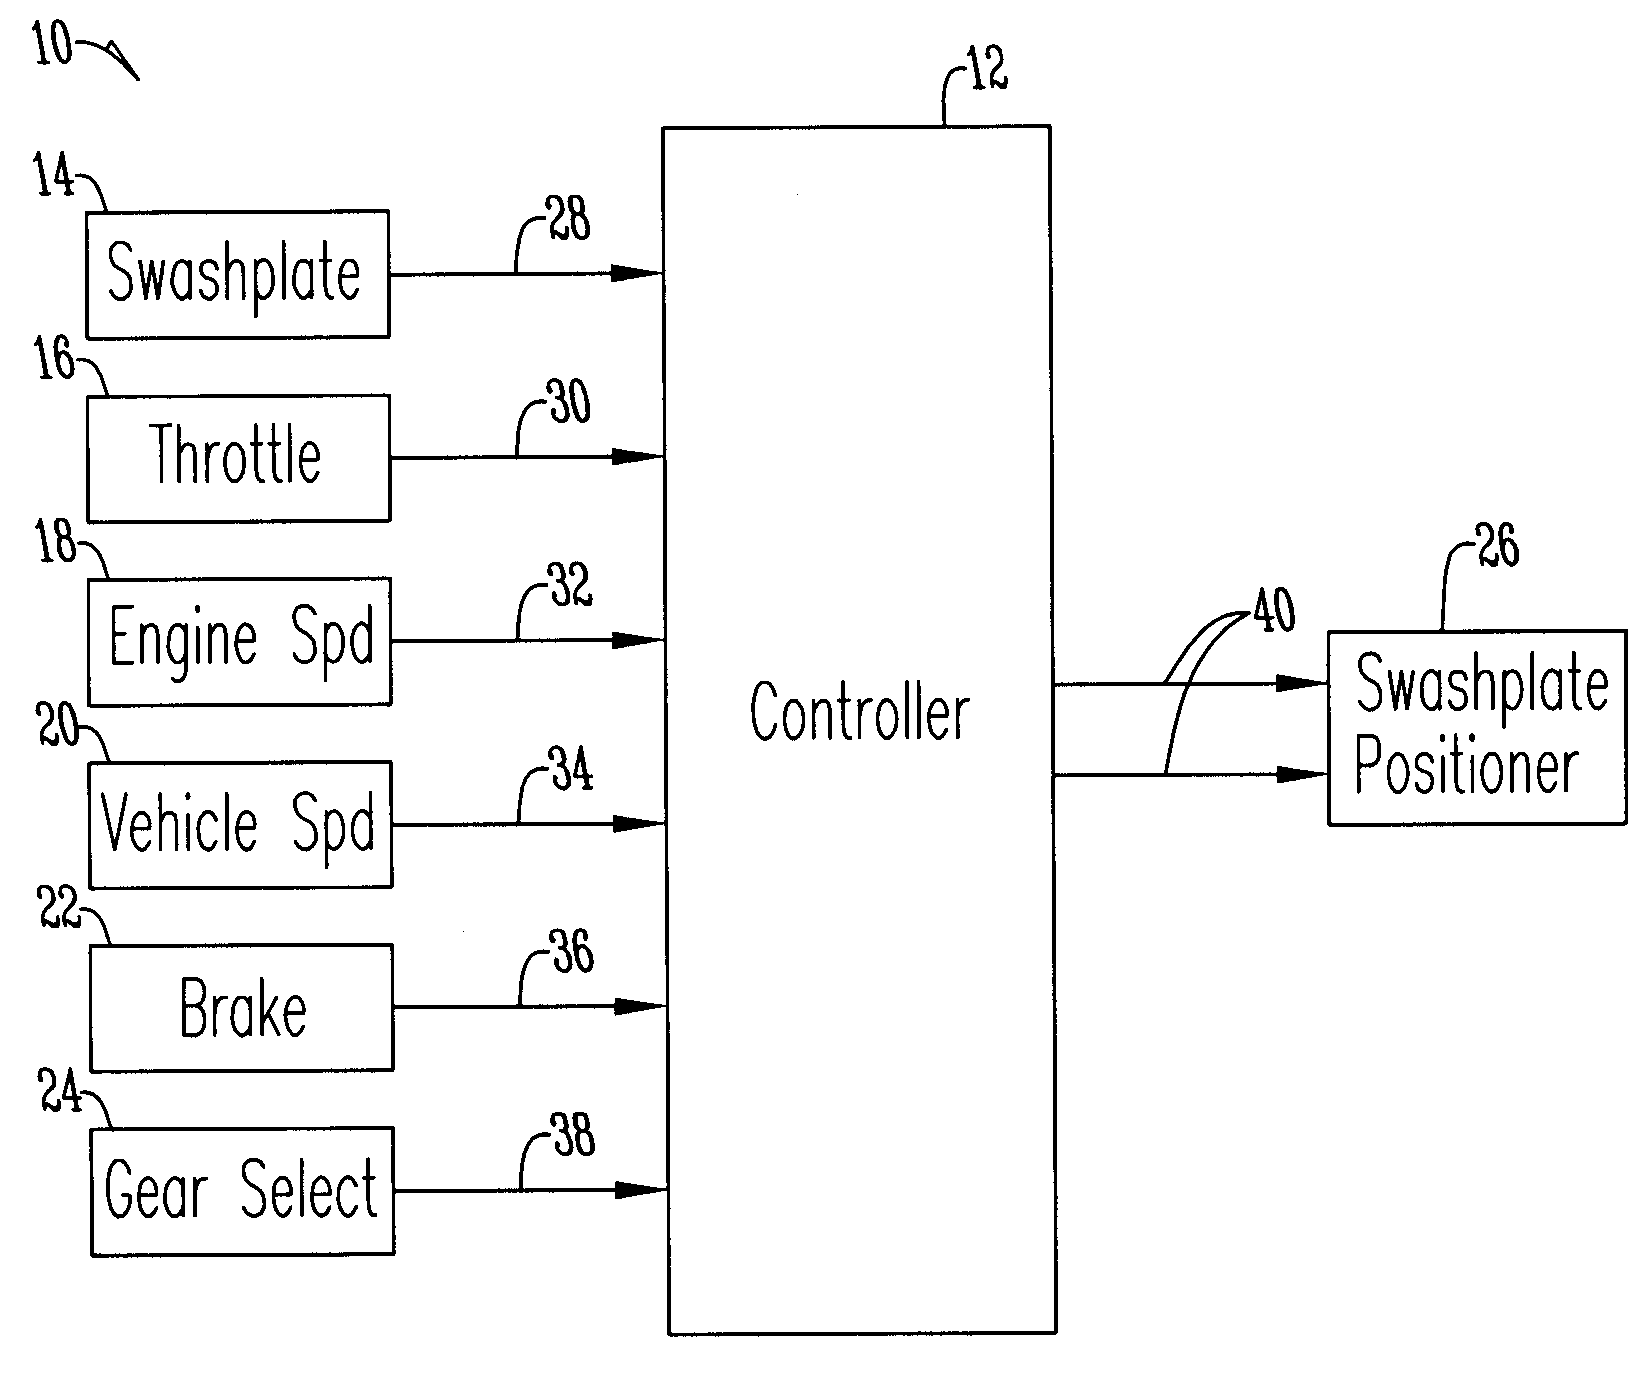 Engine speed control for a low power hydromechanical transmission